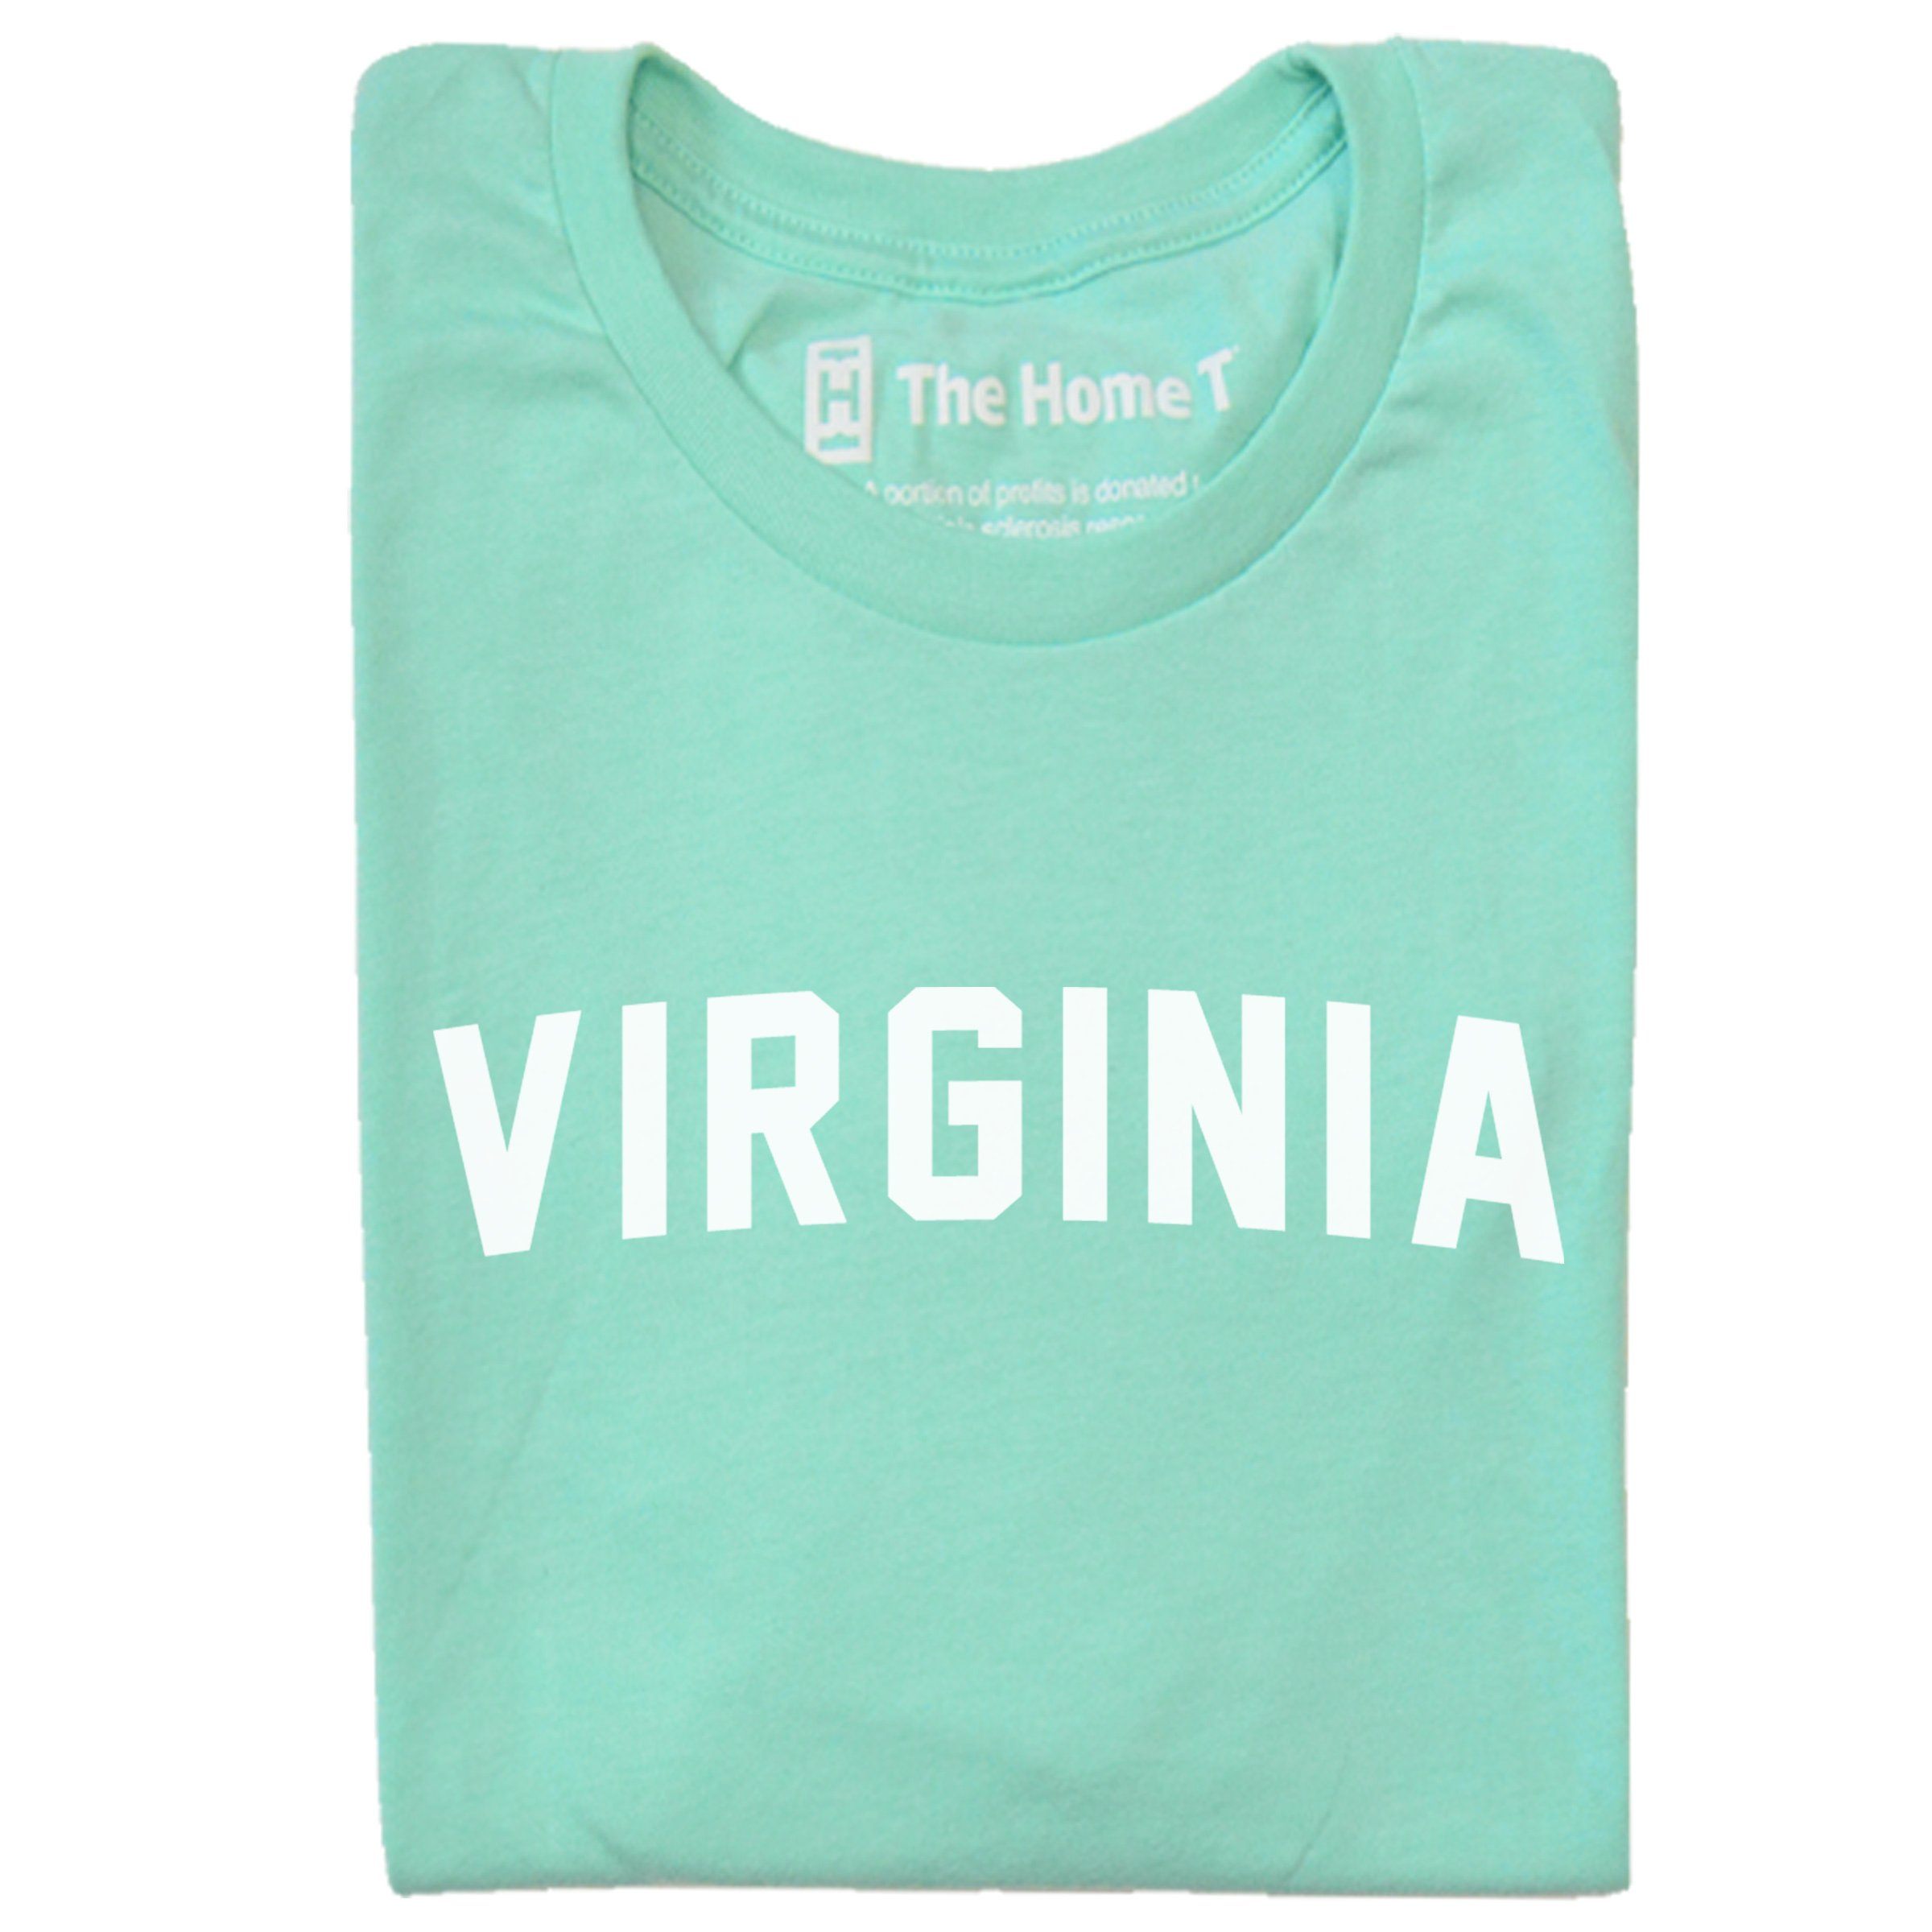 Virginia Arched The Home T XS Mint